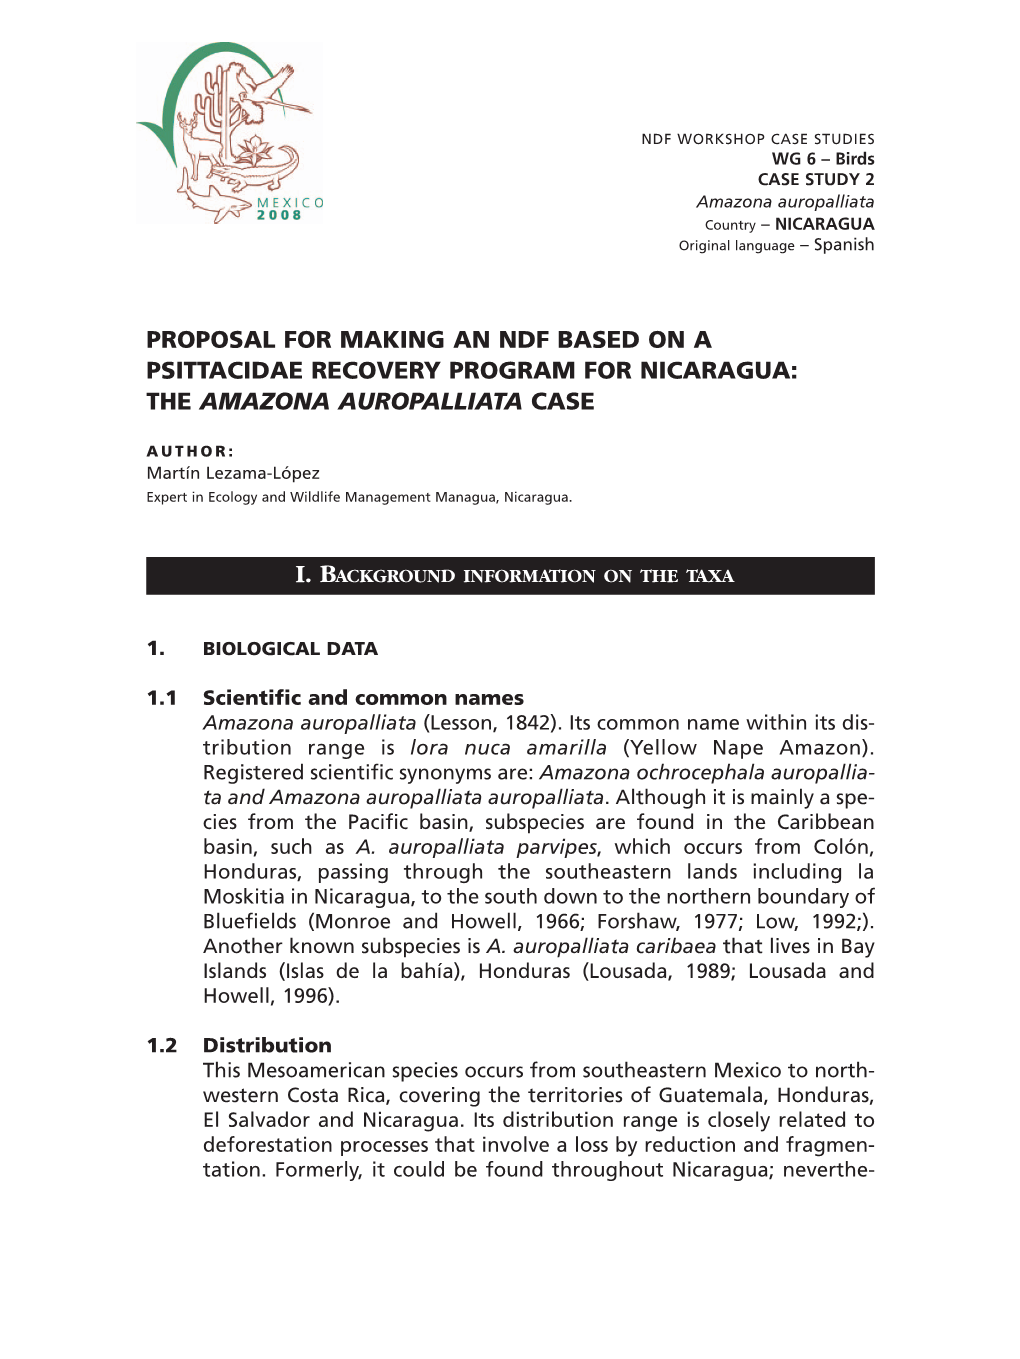 Proposal for Making an Ndf Based on a Psittacidae Recovery Program for Nicaragua: the Amazona Auropalliata Case